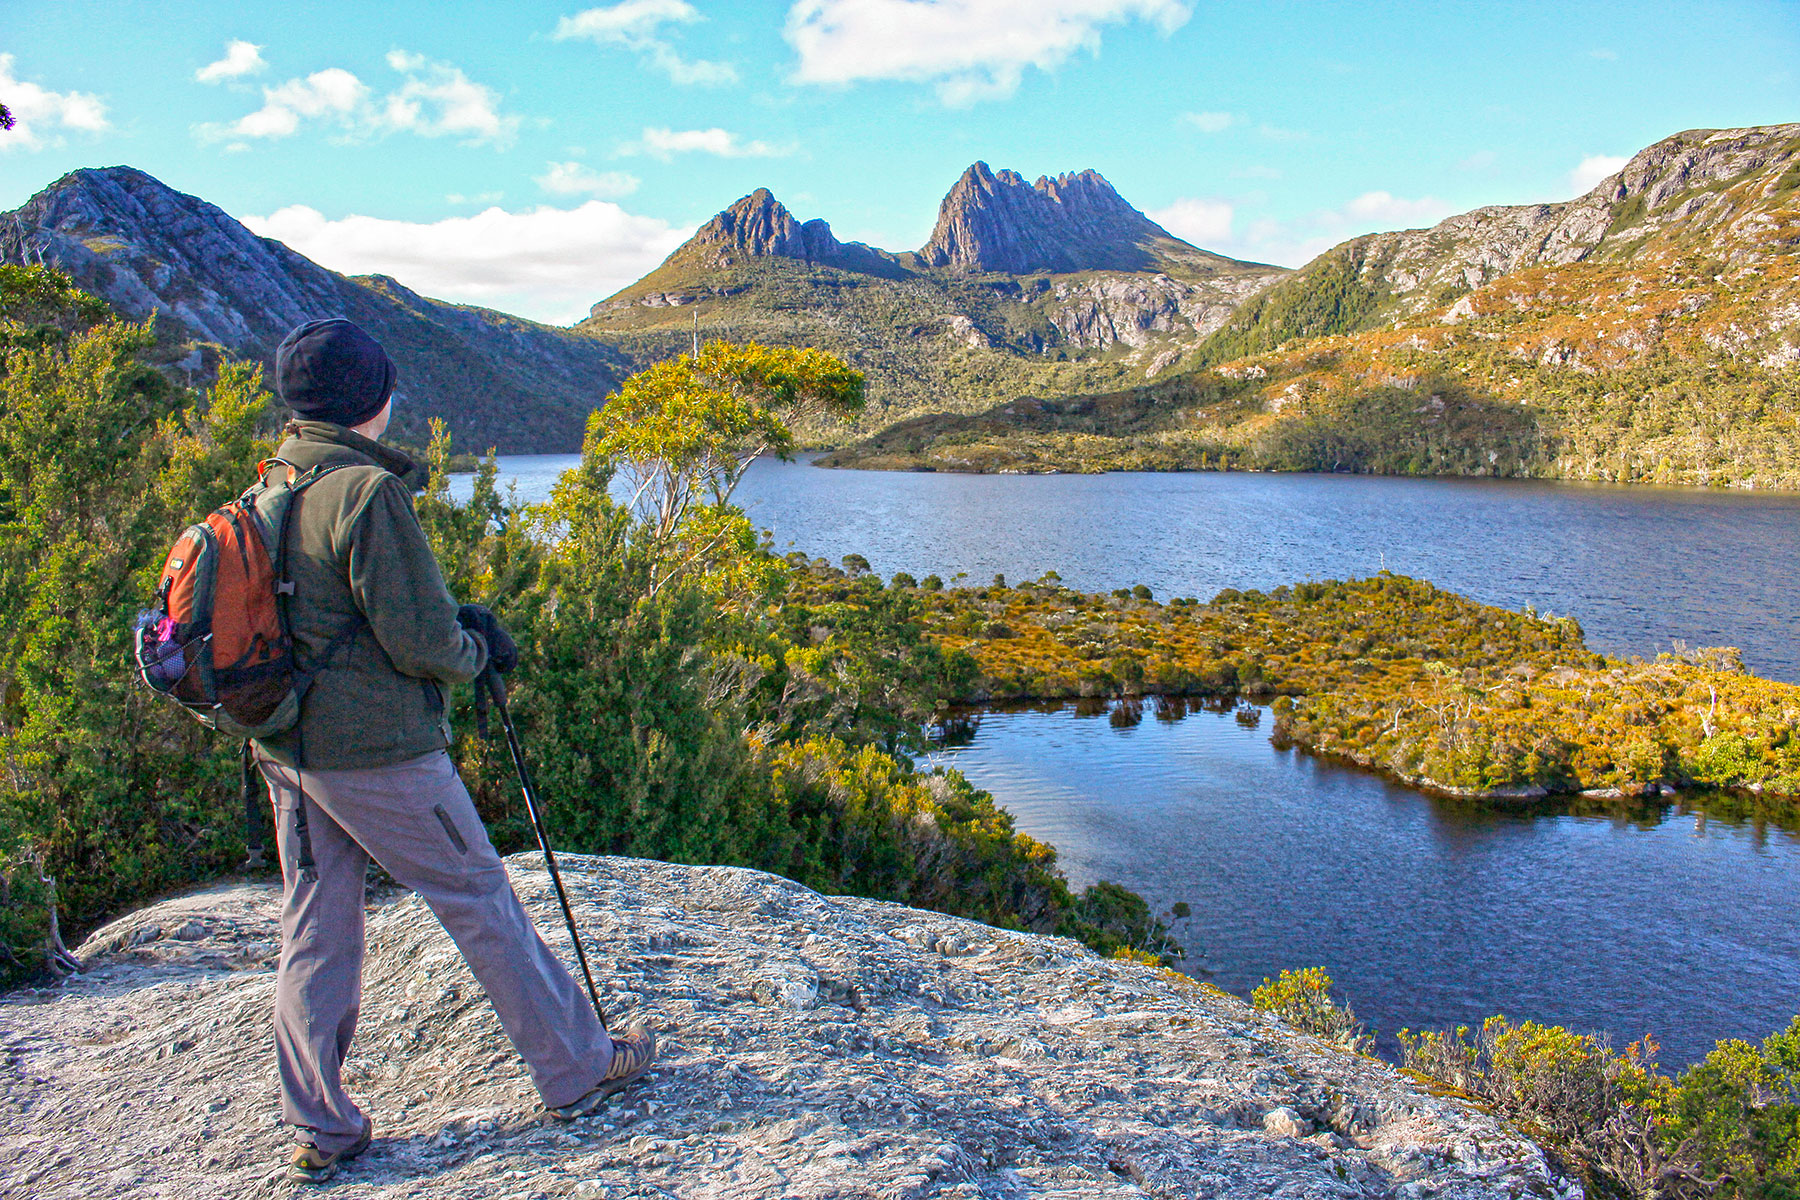 The view of Dove Lake and Cradle Mountain from Glacier Rock